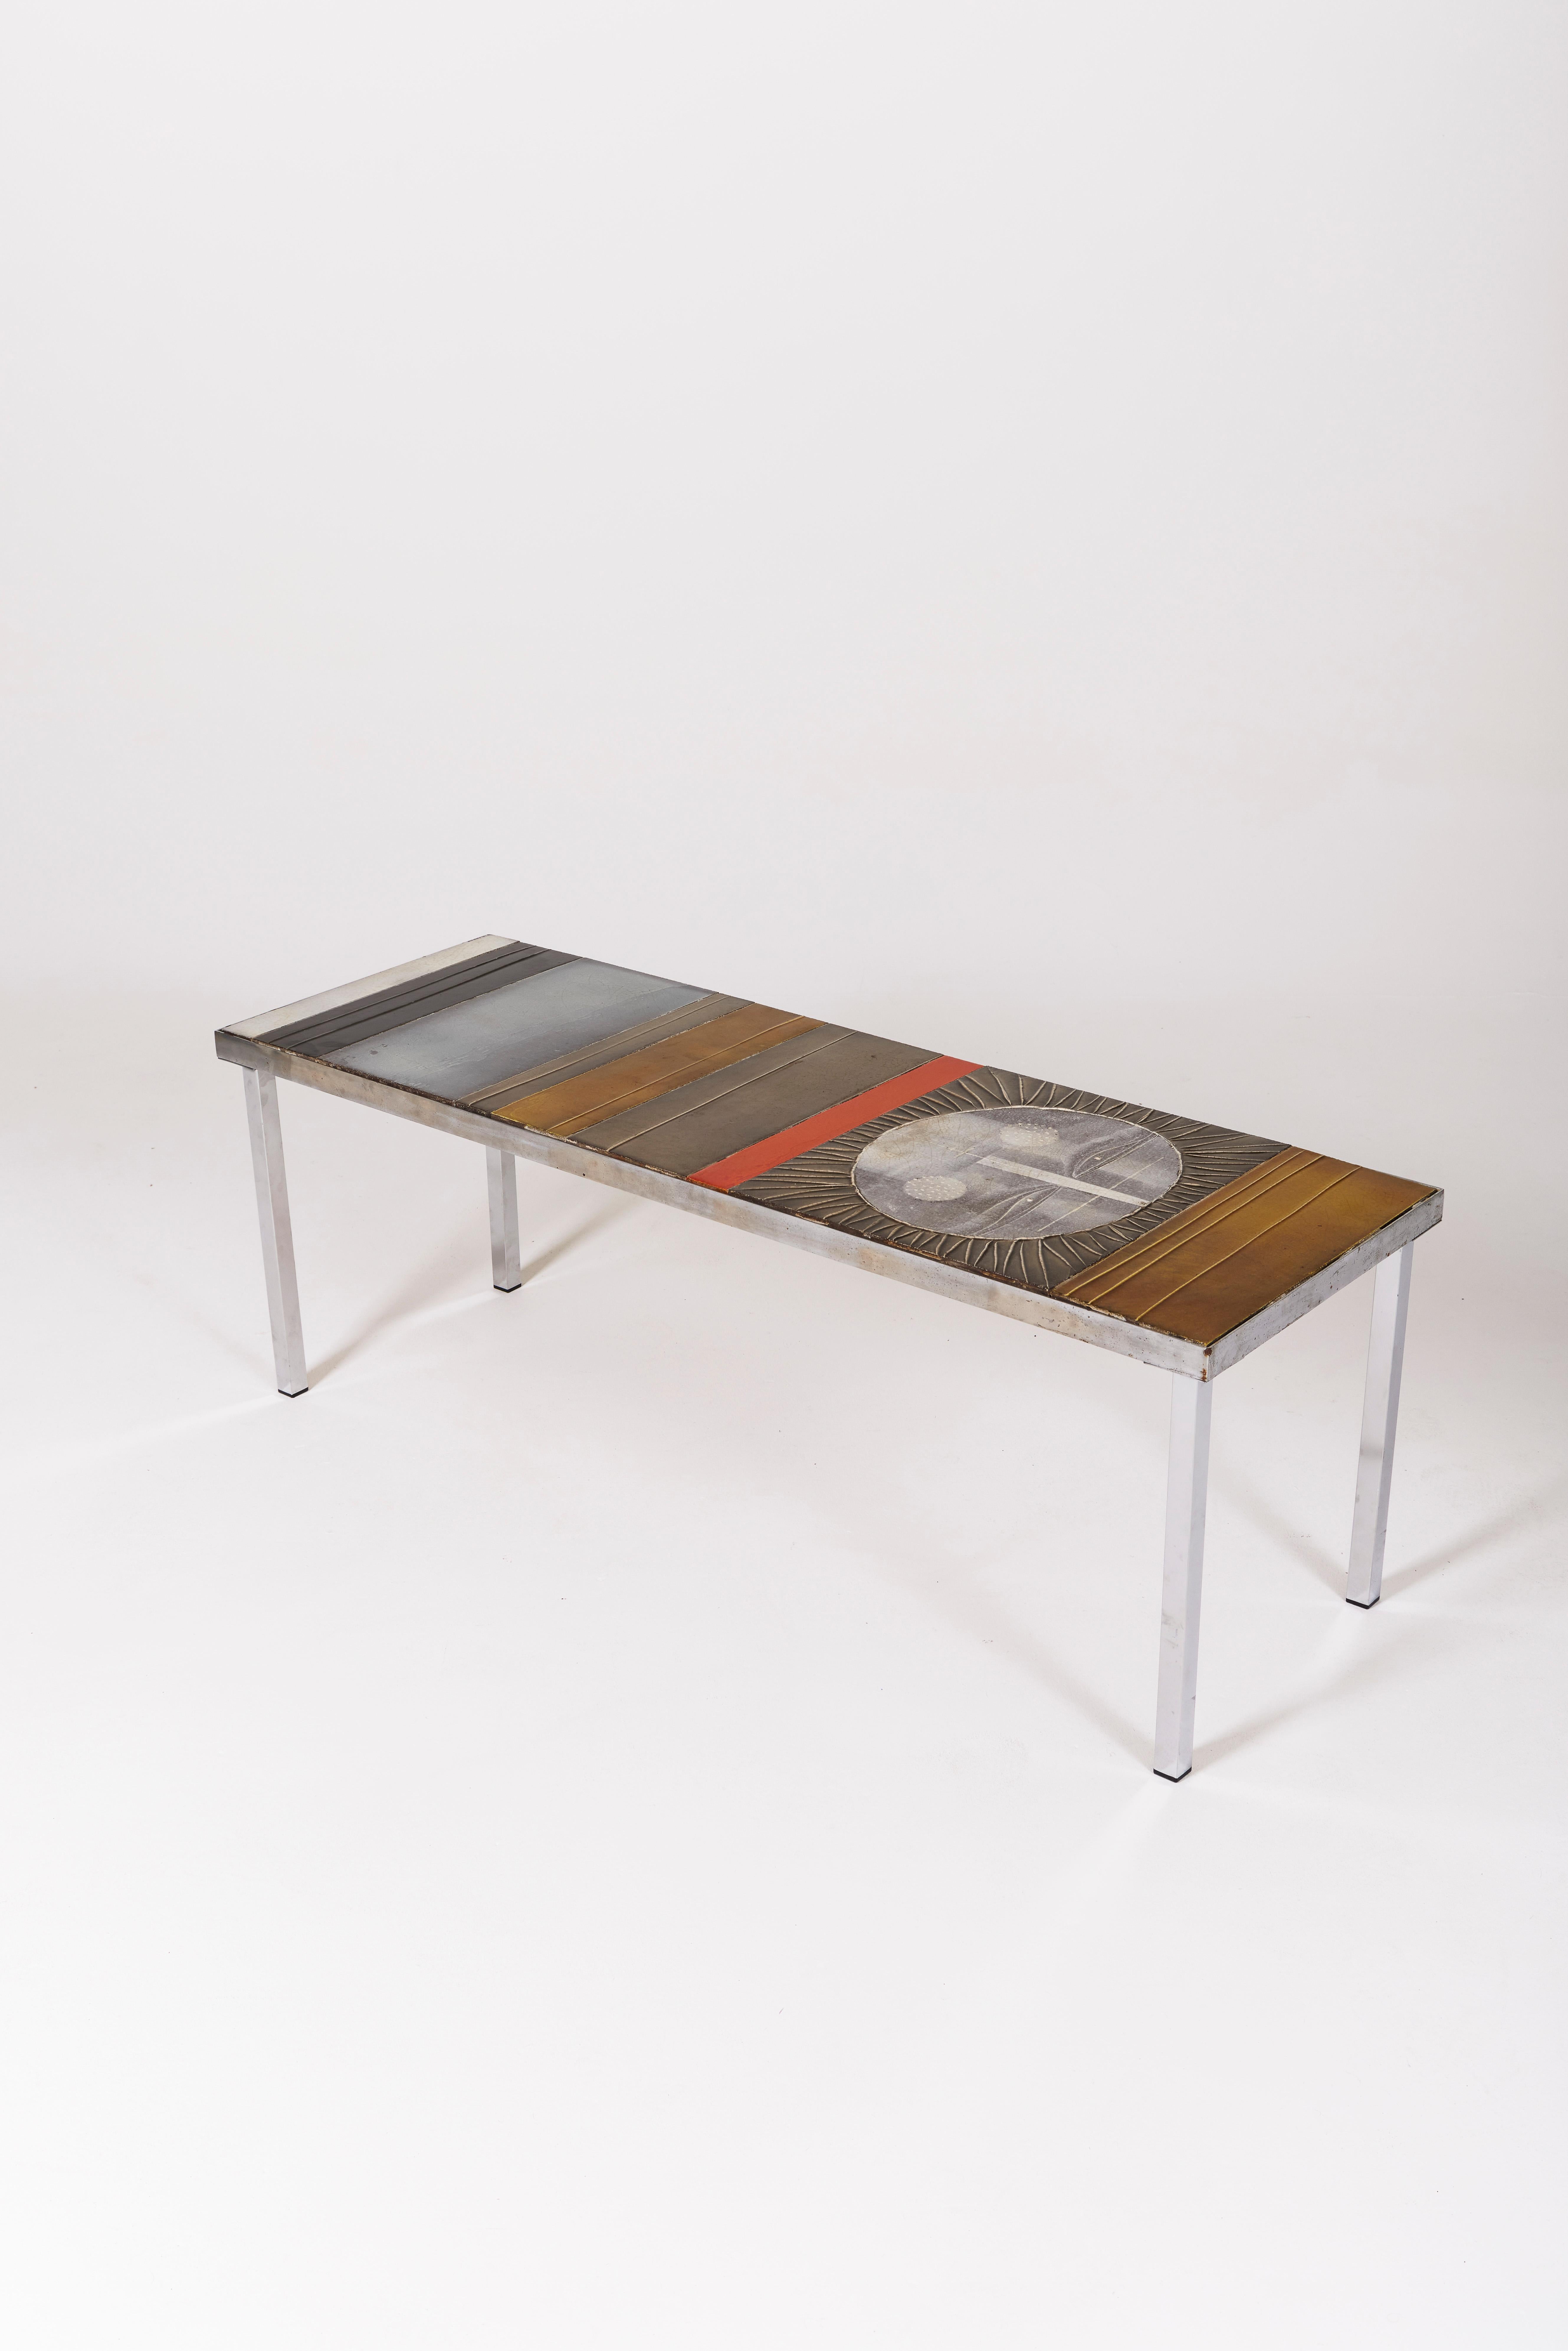 20th Century Ceramic coffee table by Roger Capron